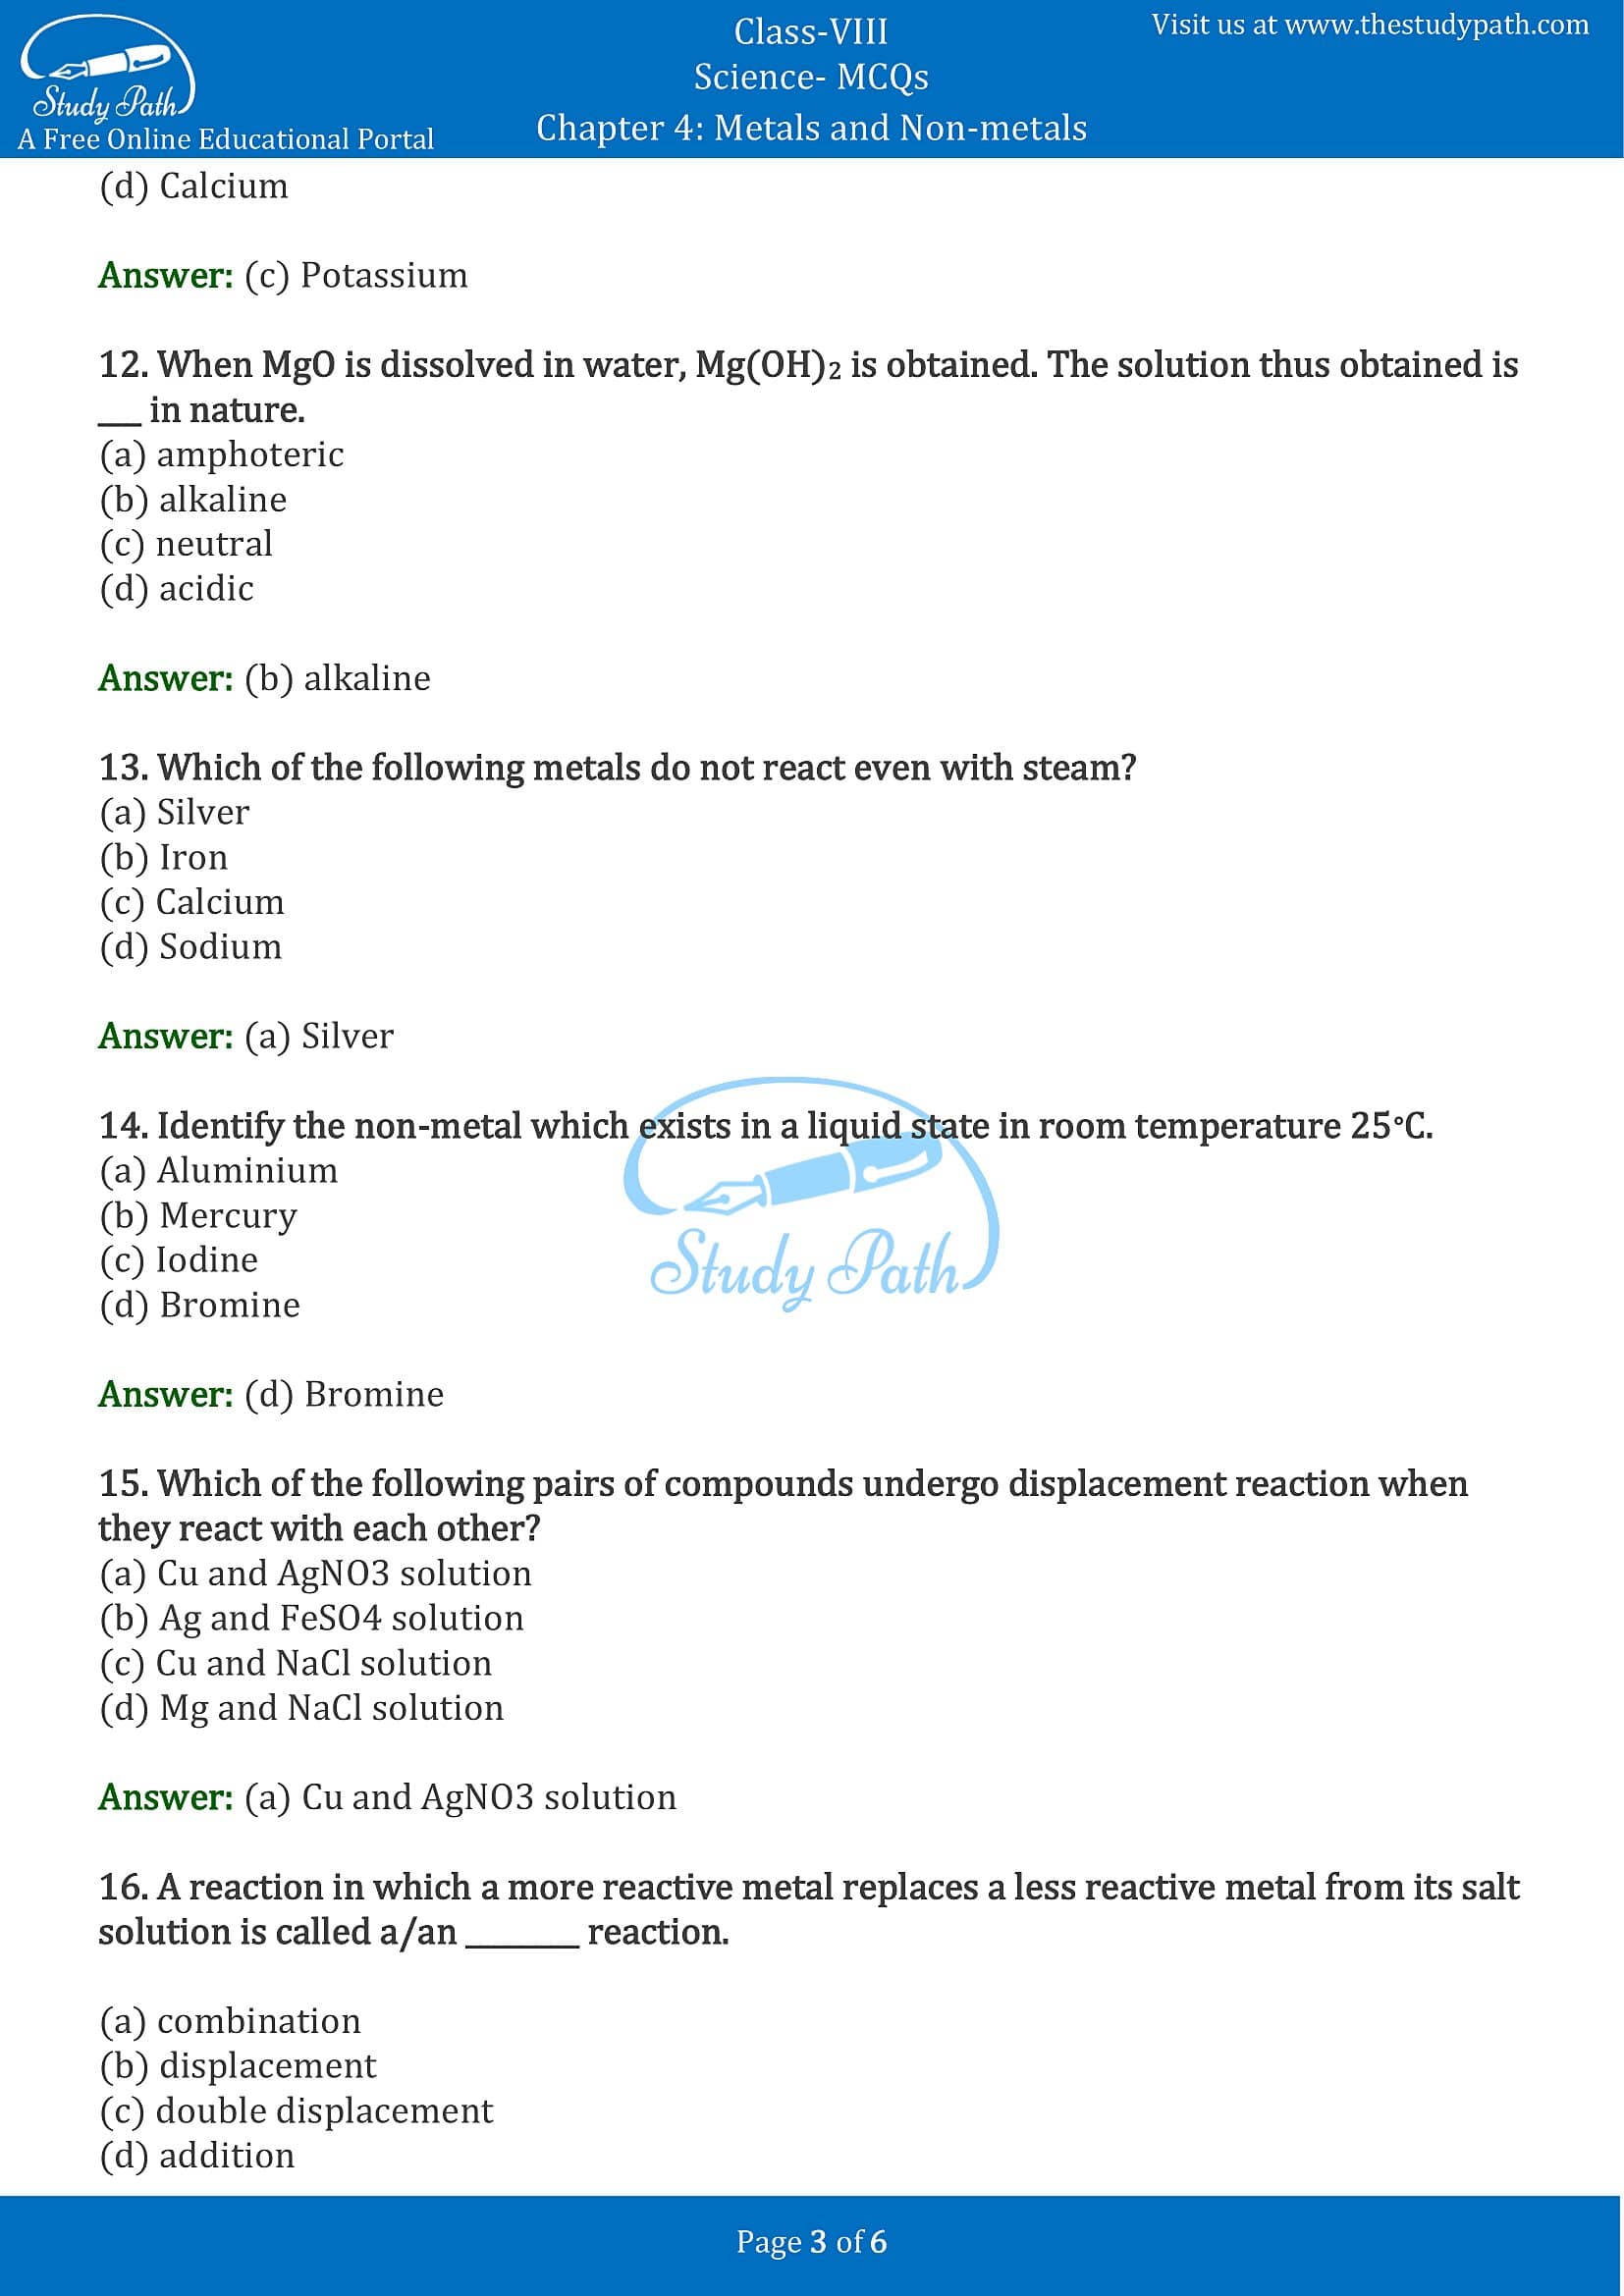 MCQ Questions for Class 8 Science Chapter 4 Metals and Non-metals with Answers PDF -3